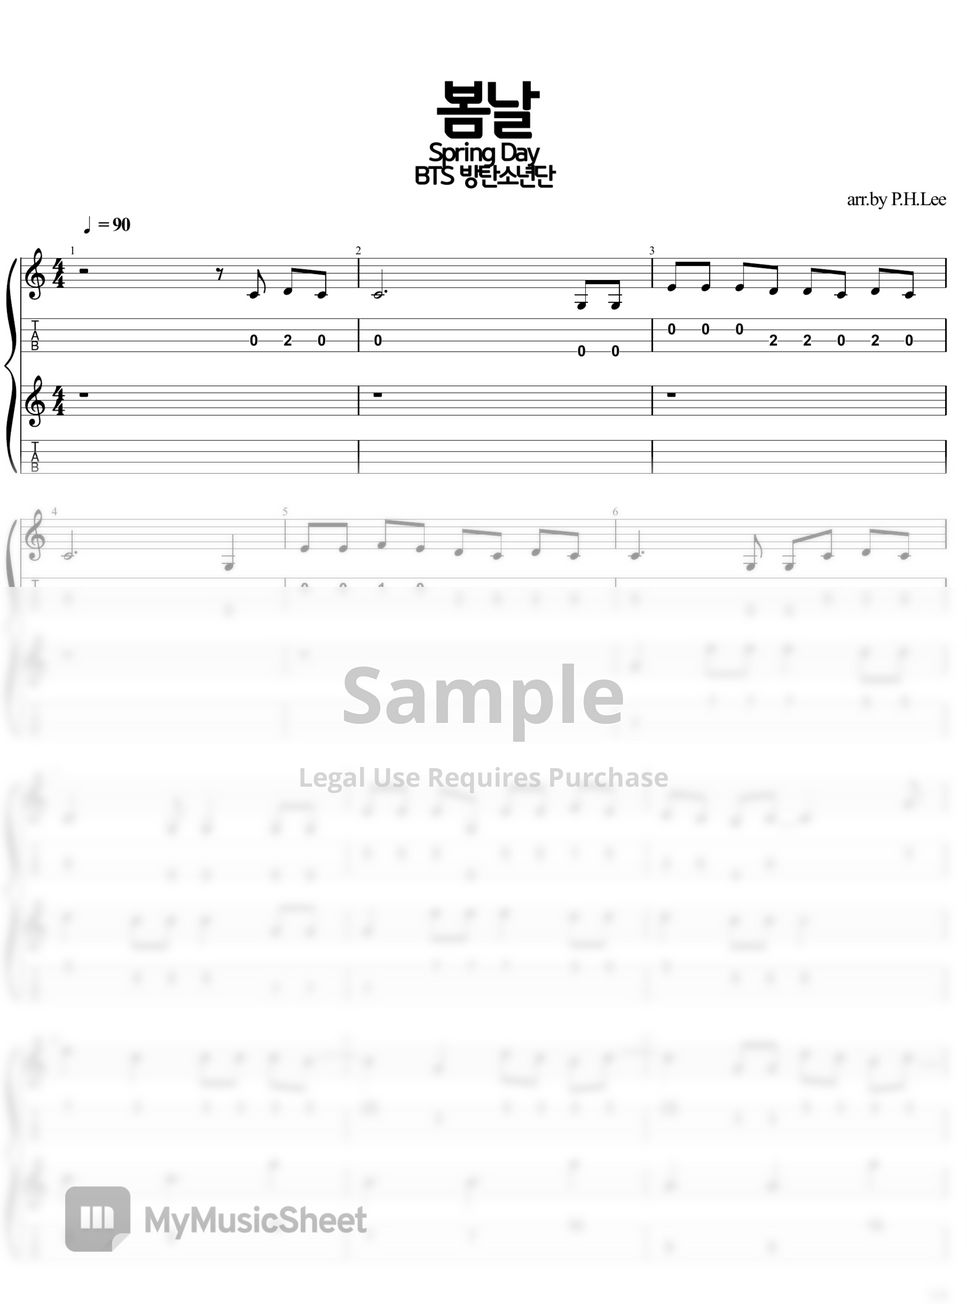 BTS - Spring Day (1st,2nd,3rd,4th) Ukulele TAB Sheets by P3